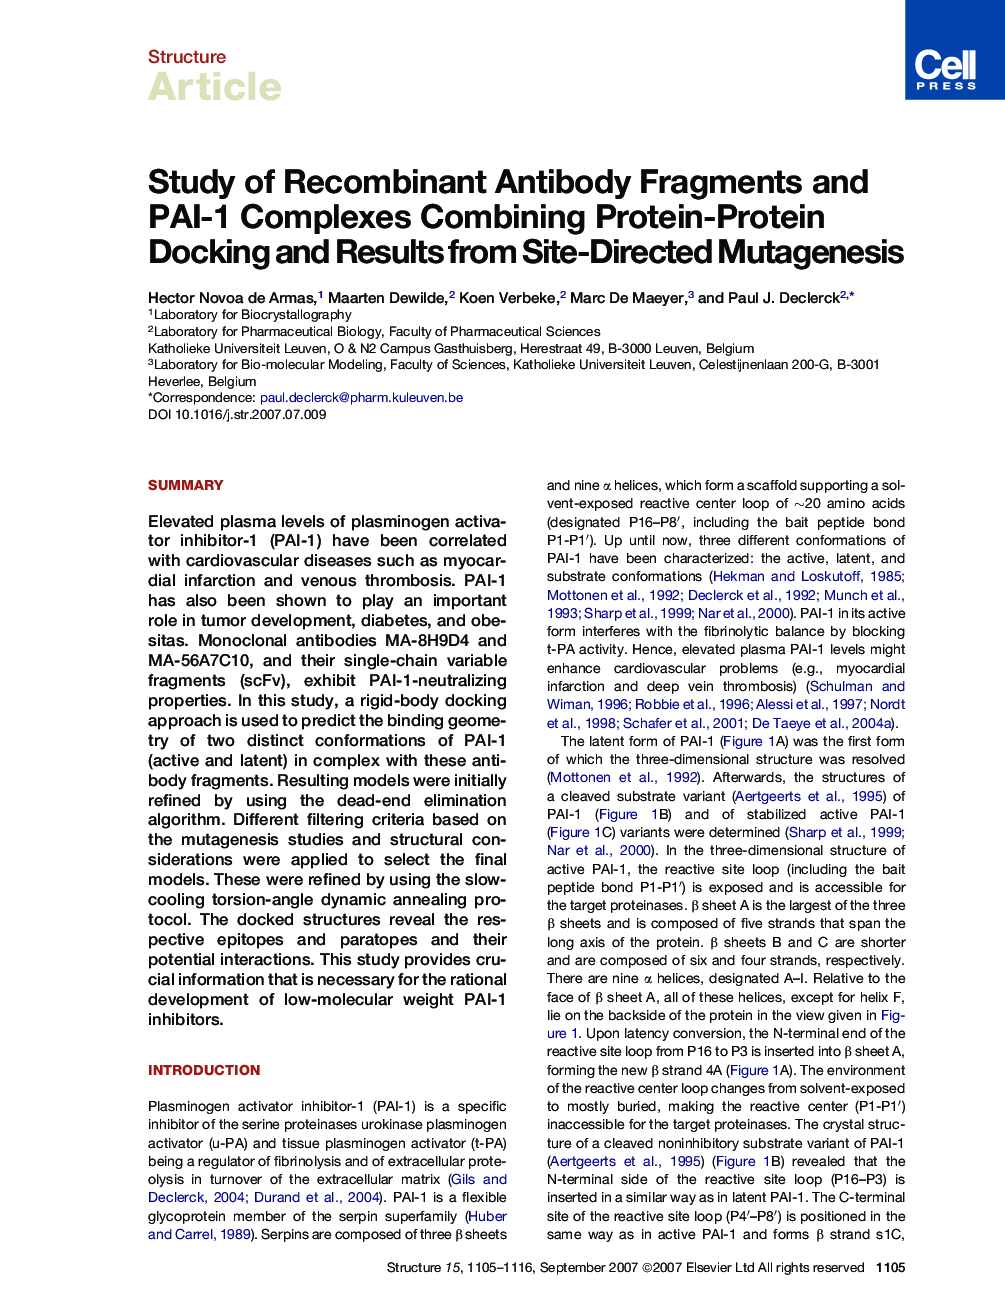 Study of Recombinant Antibody Fragments and PAI-1 Complexes Combining Protein-Protein Docking and Results from Site-Directed Mutagenesis